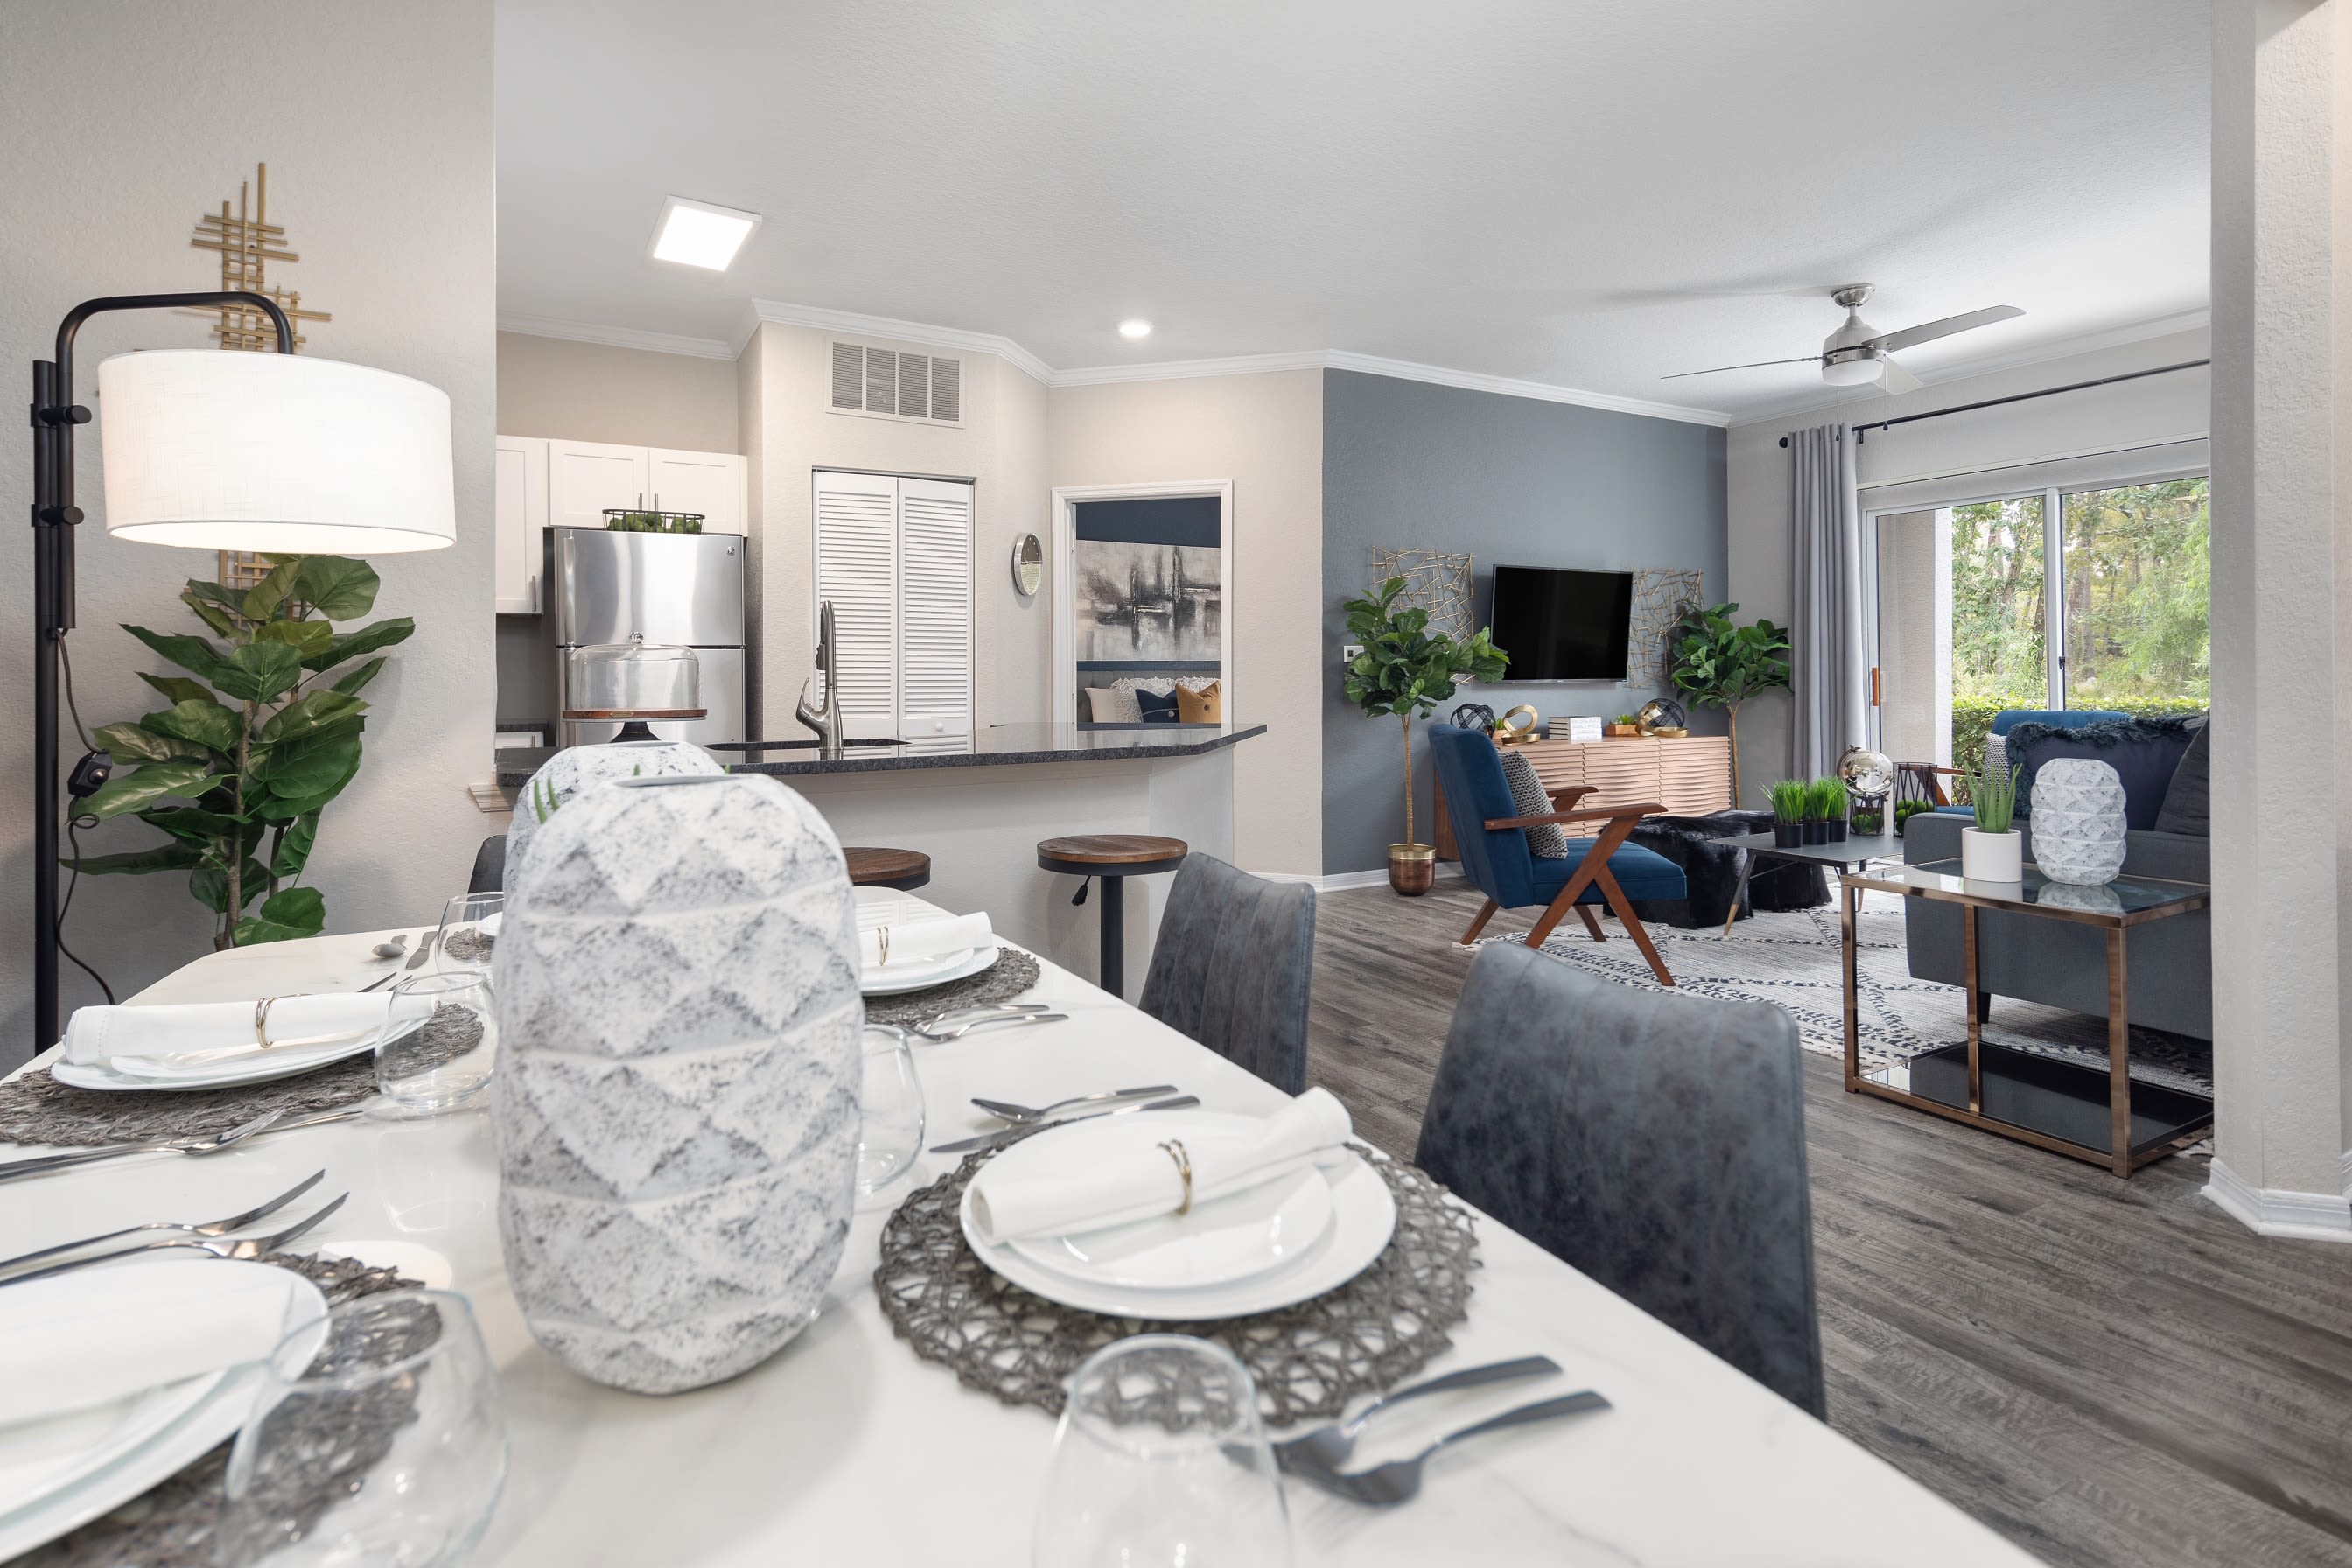 View of the kitchen and living areas from an open-concept model apartment's dining area at Mezza in Jacksonville, Florida